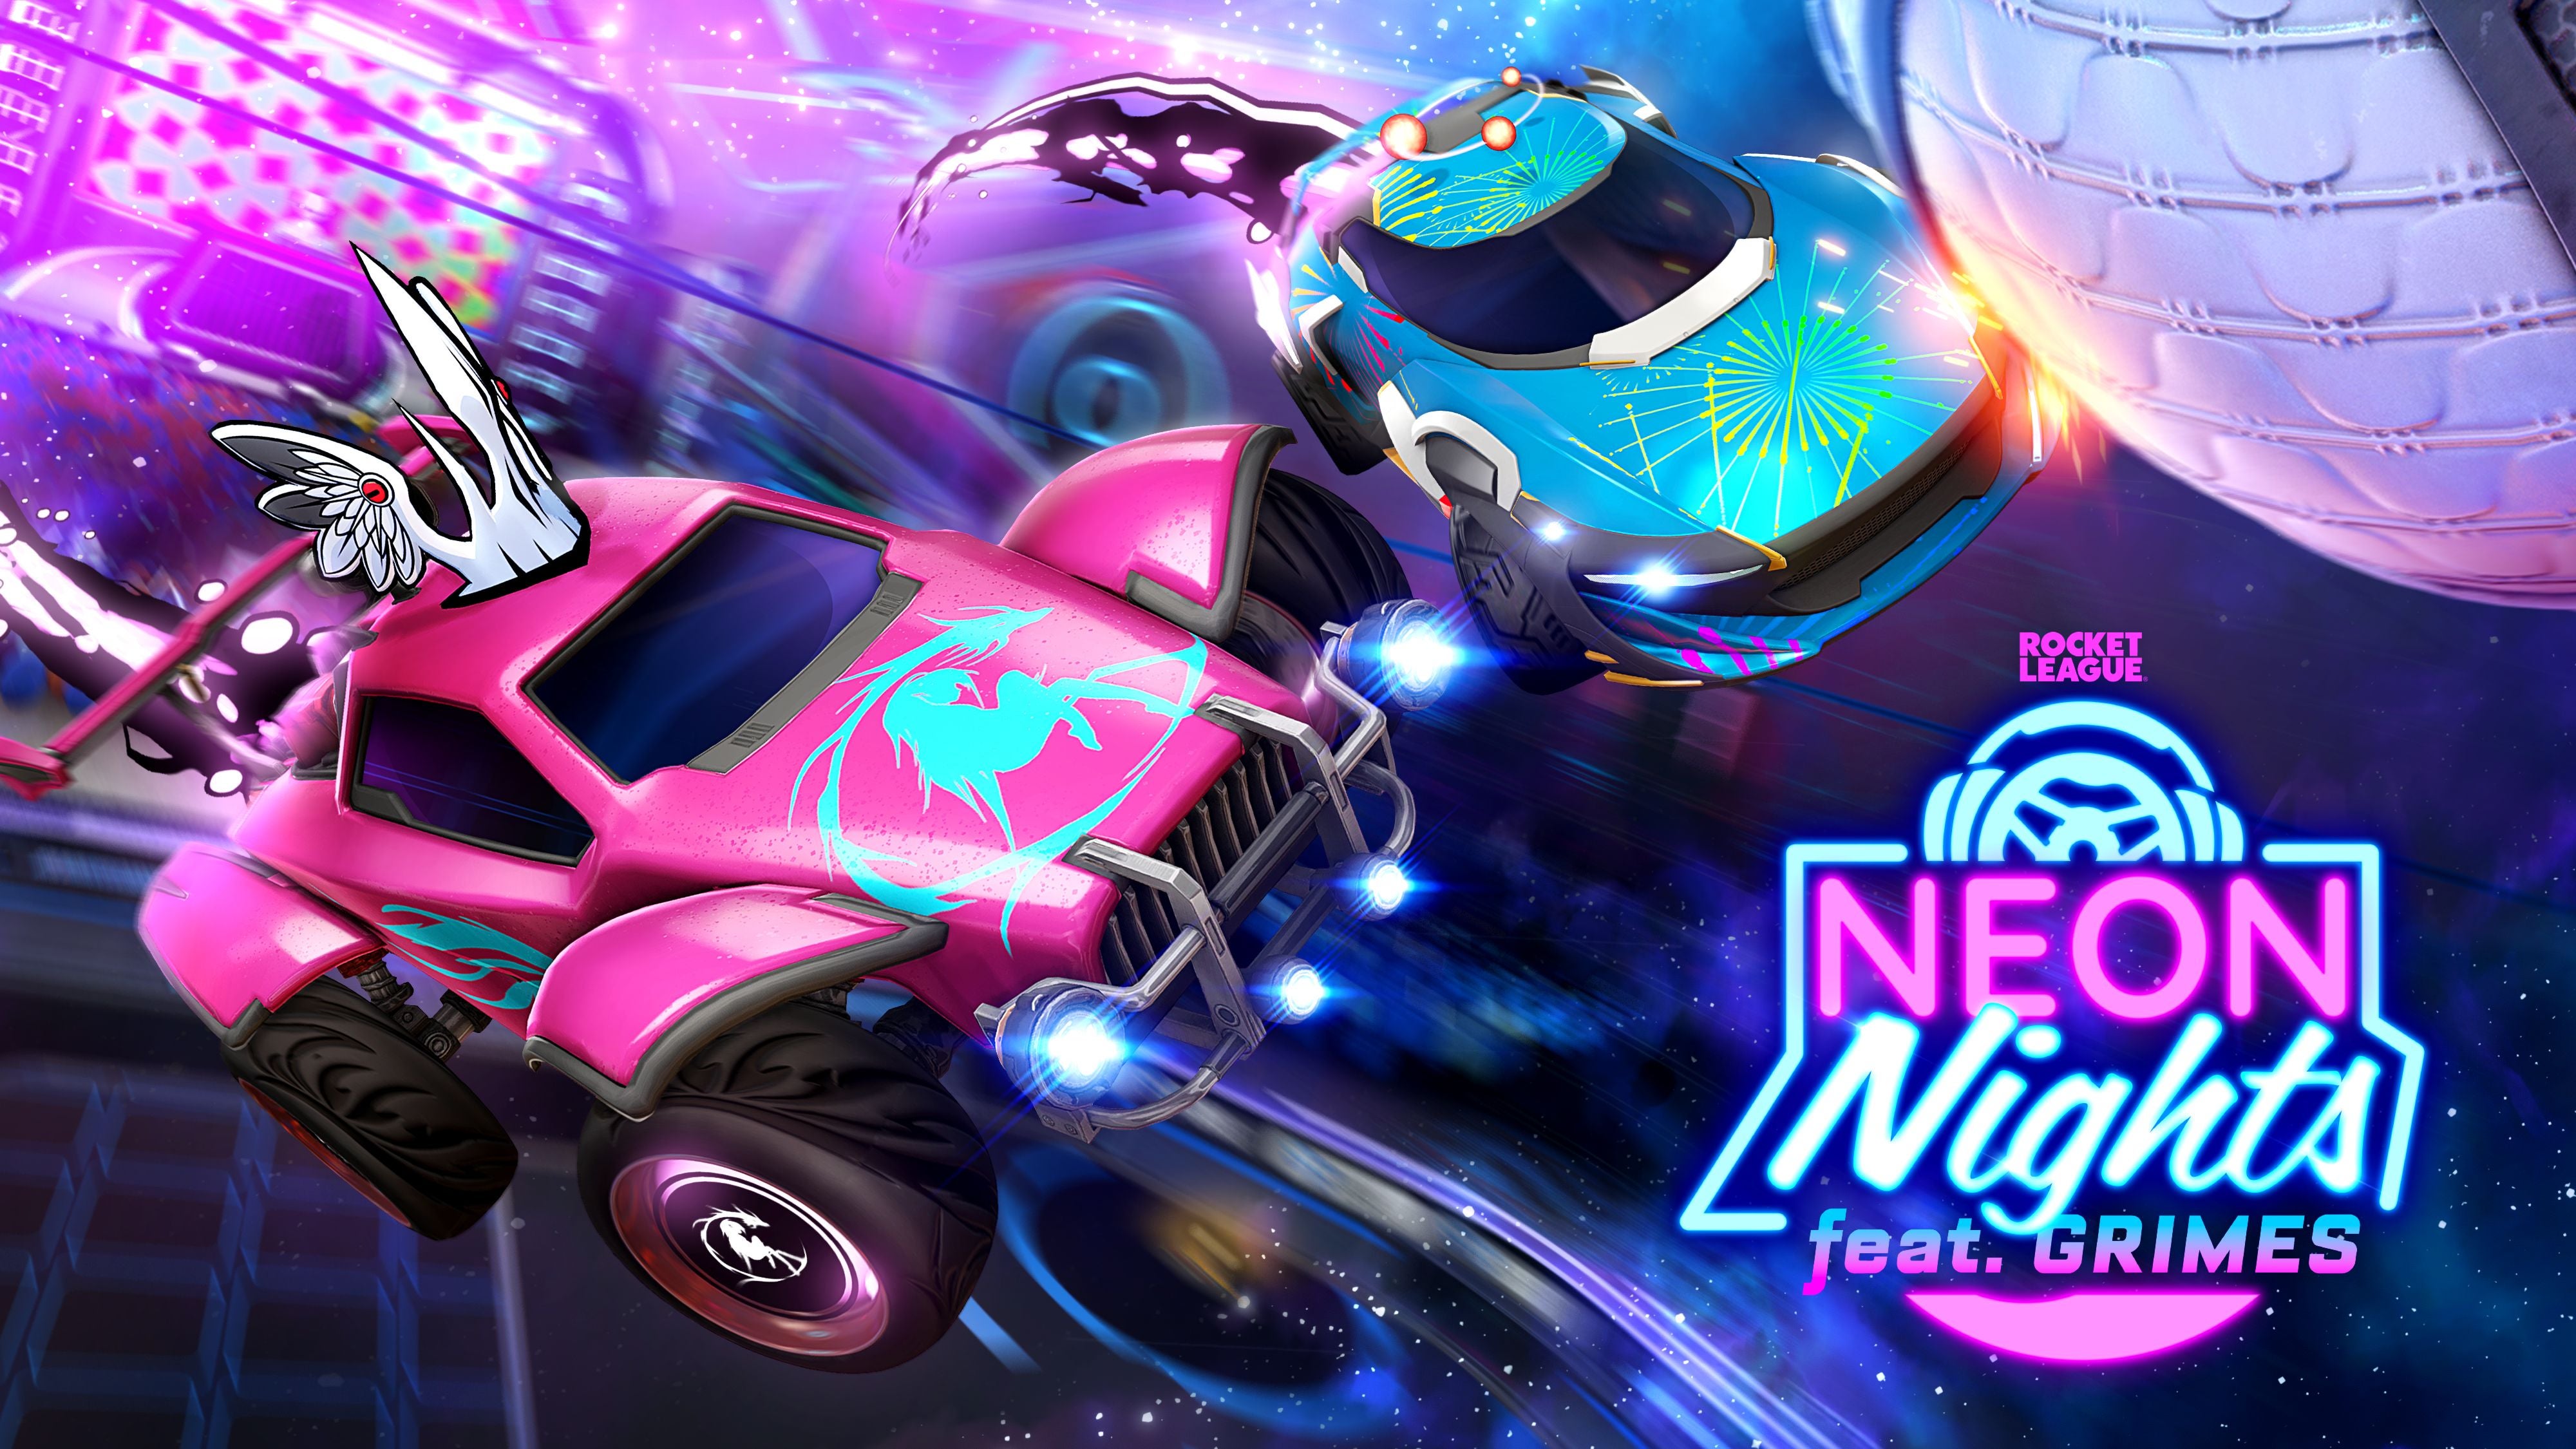 Image for New Rocket League Event - Neon Nights - features GRIMES cosmetics and launches January 26